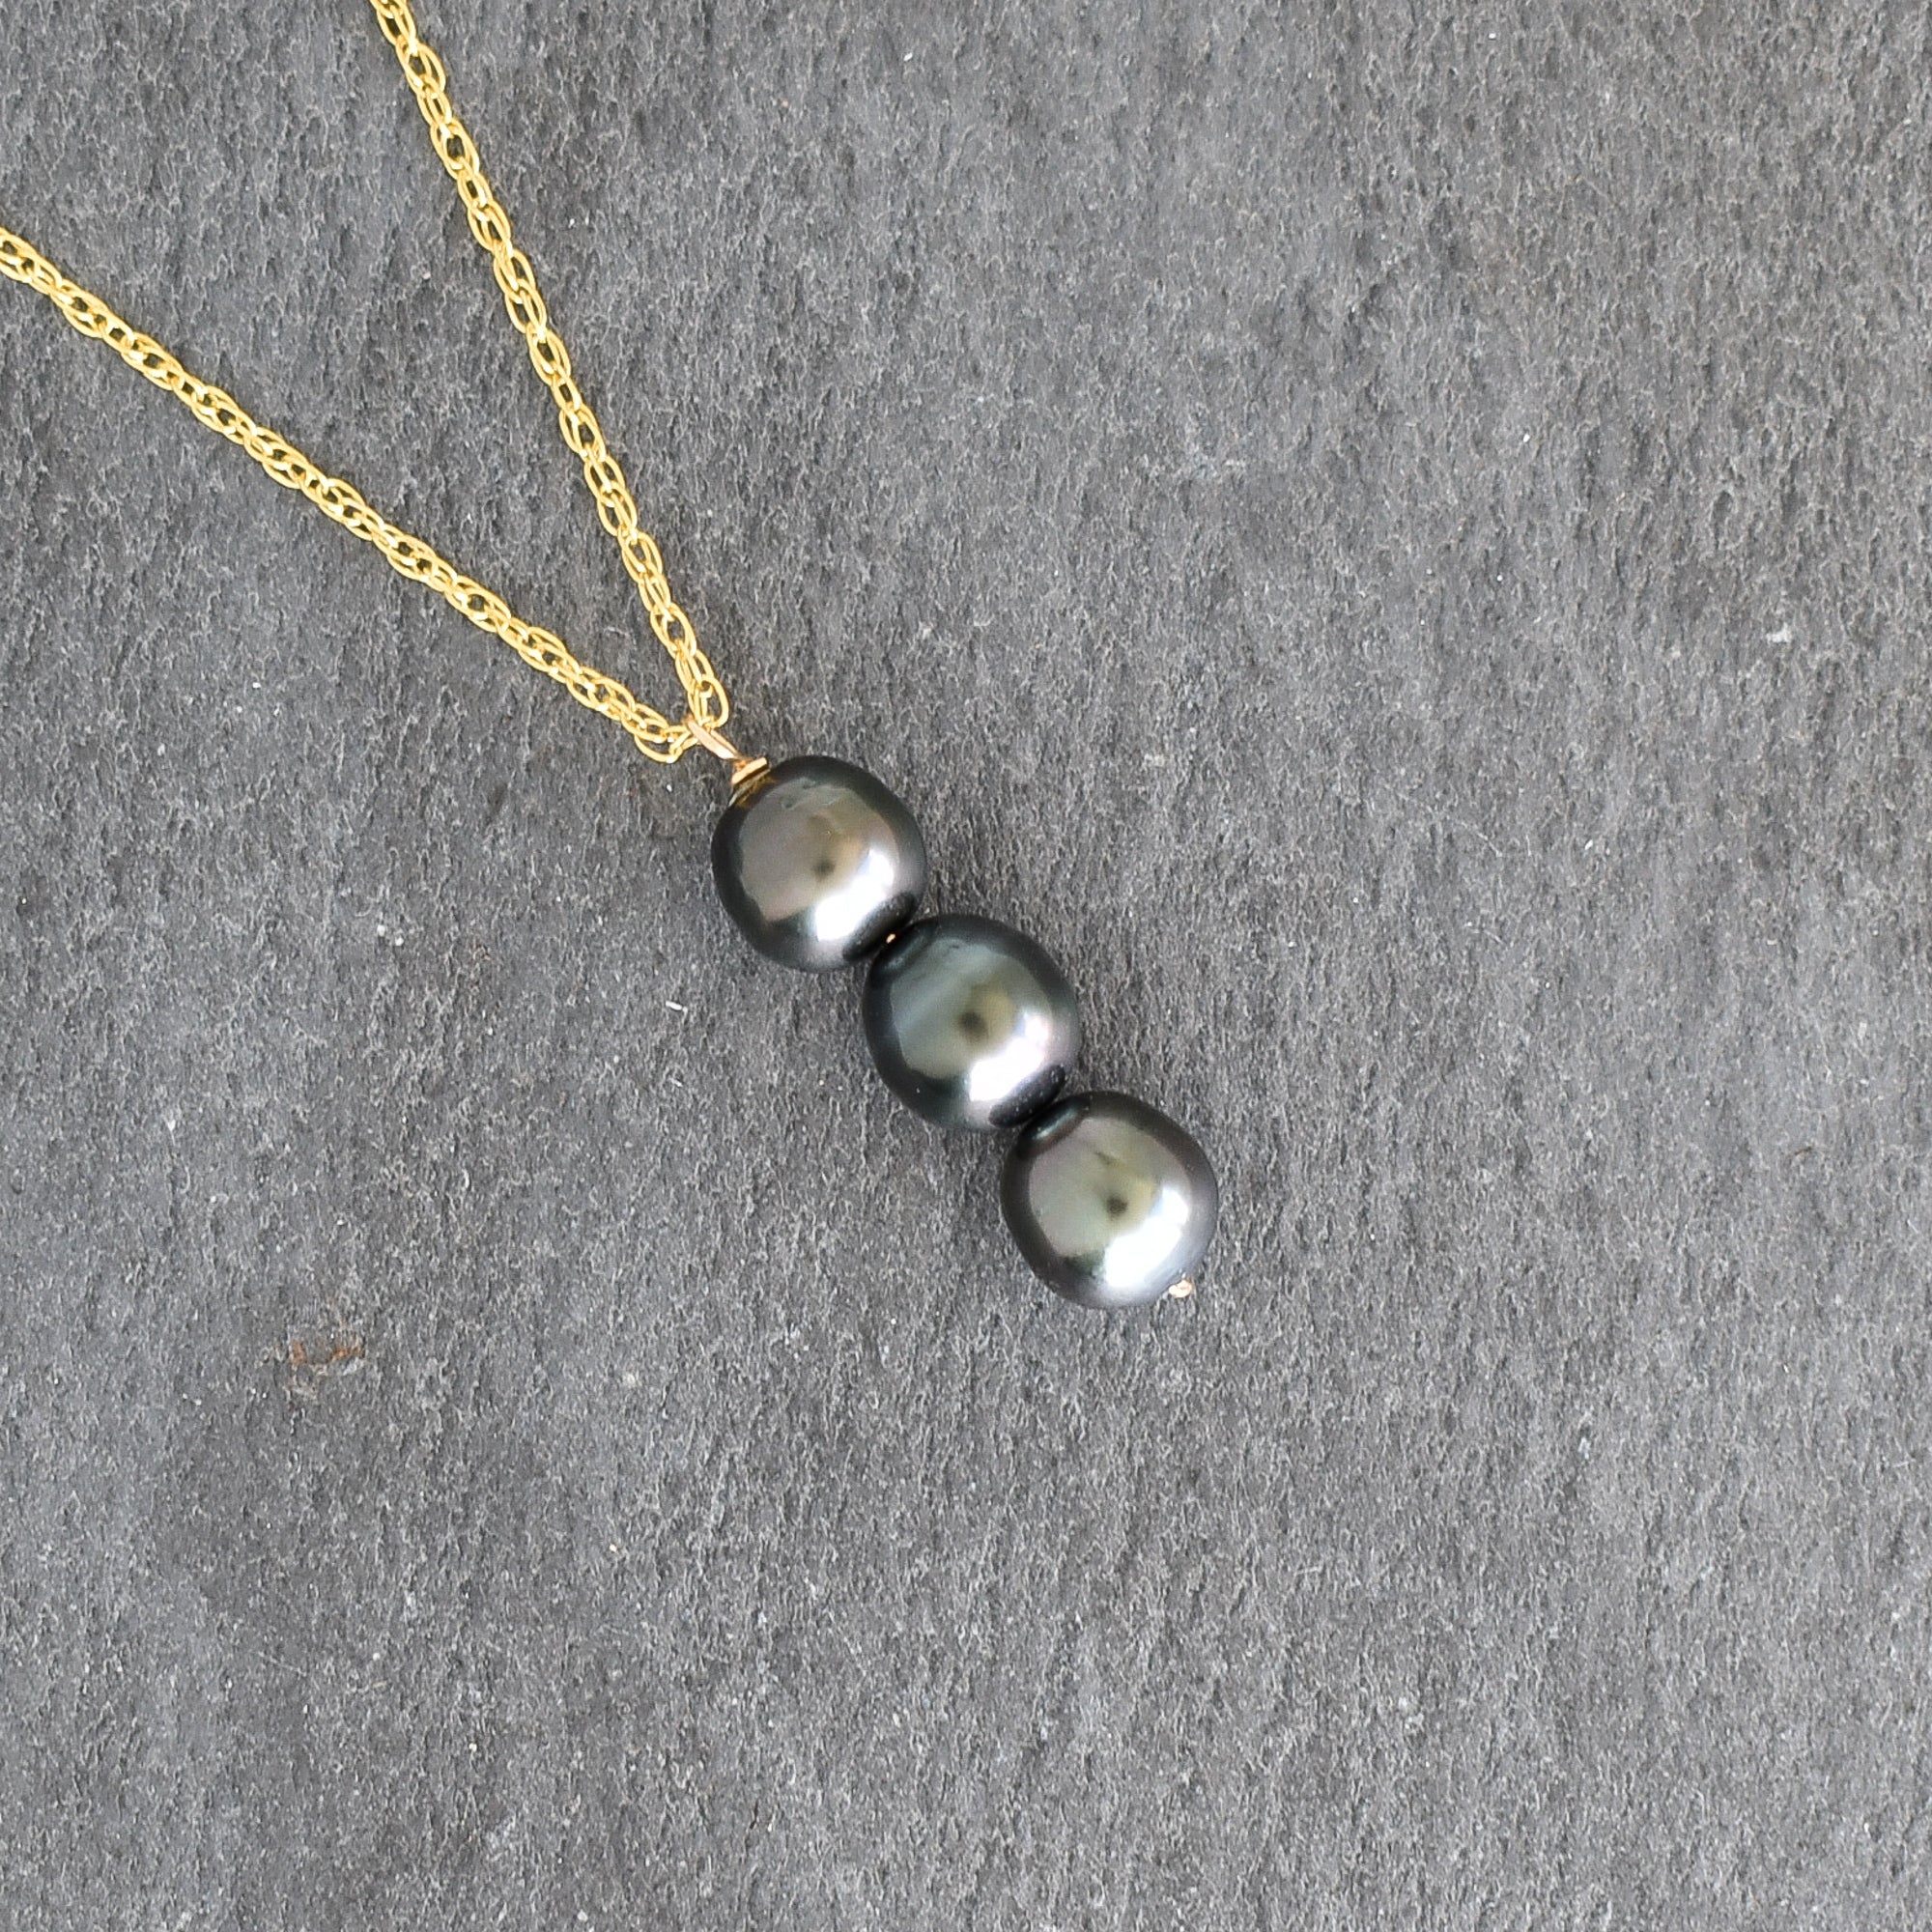 V” Style Tahitian Pearl Necklace • The perfect statement piece to dress up  an outfit for a night out • $200 (price subject... | Instagram